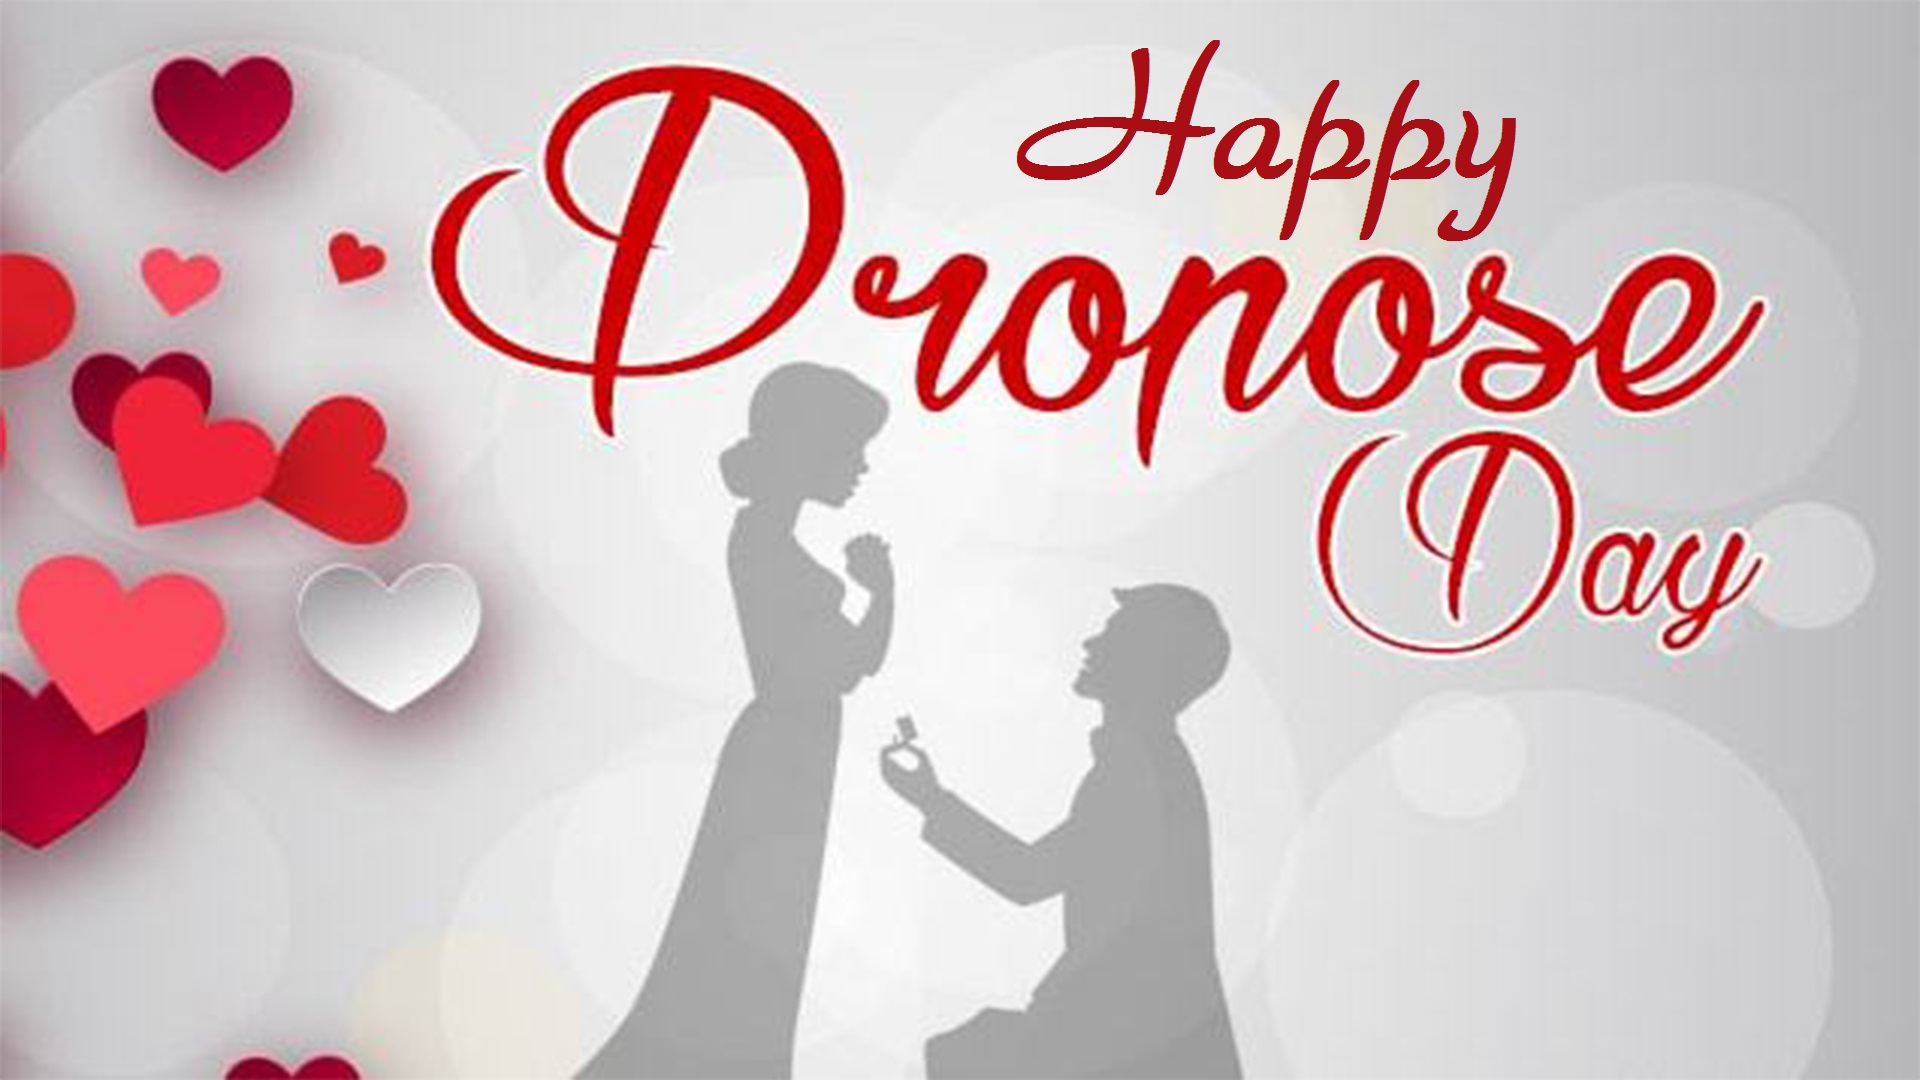 happy propose day 2018 image